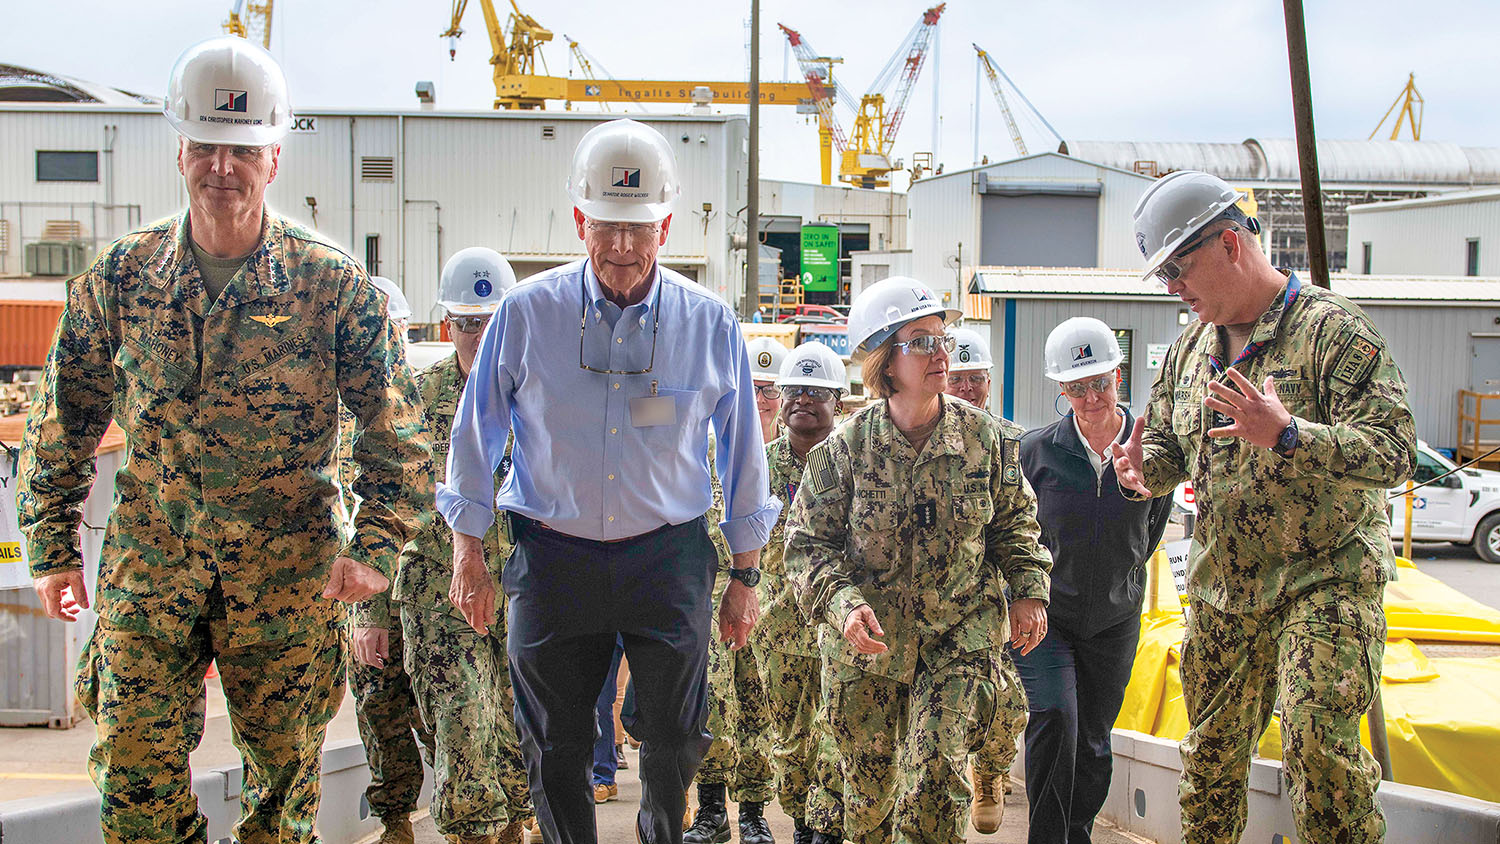 Chief of Naval Operations Adm. Lisa Franchetti and Assistant Commandant of the Marine Corps Gen. Christopher Mahoney joined U.S. Sen. Roger Wicker, R-Miss, for a visit to Huntington Ingalls Industries in Pascagoula, Miss. (Photo courtesy of Huntington Ingalls Industries)